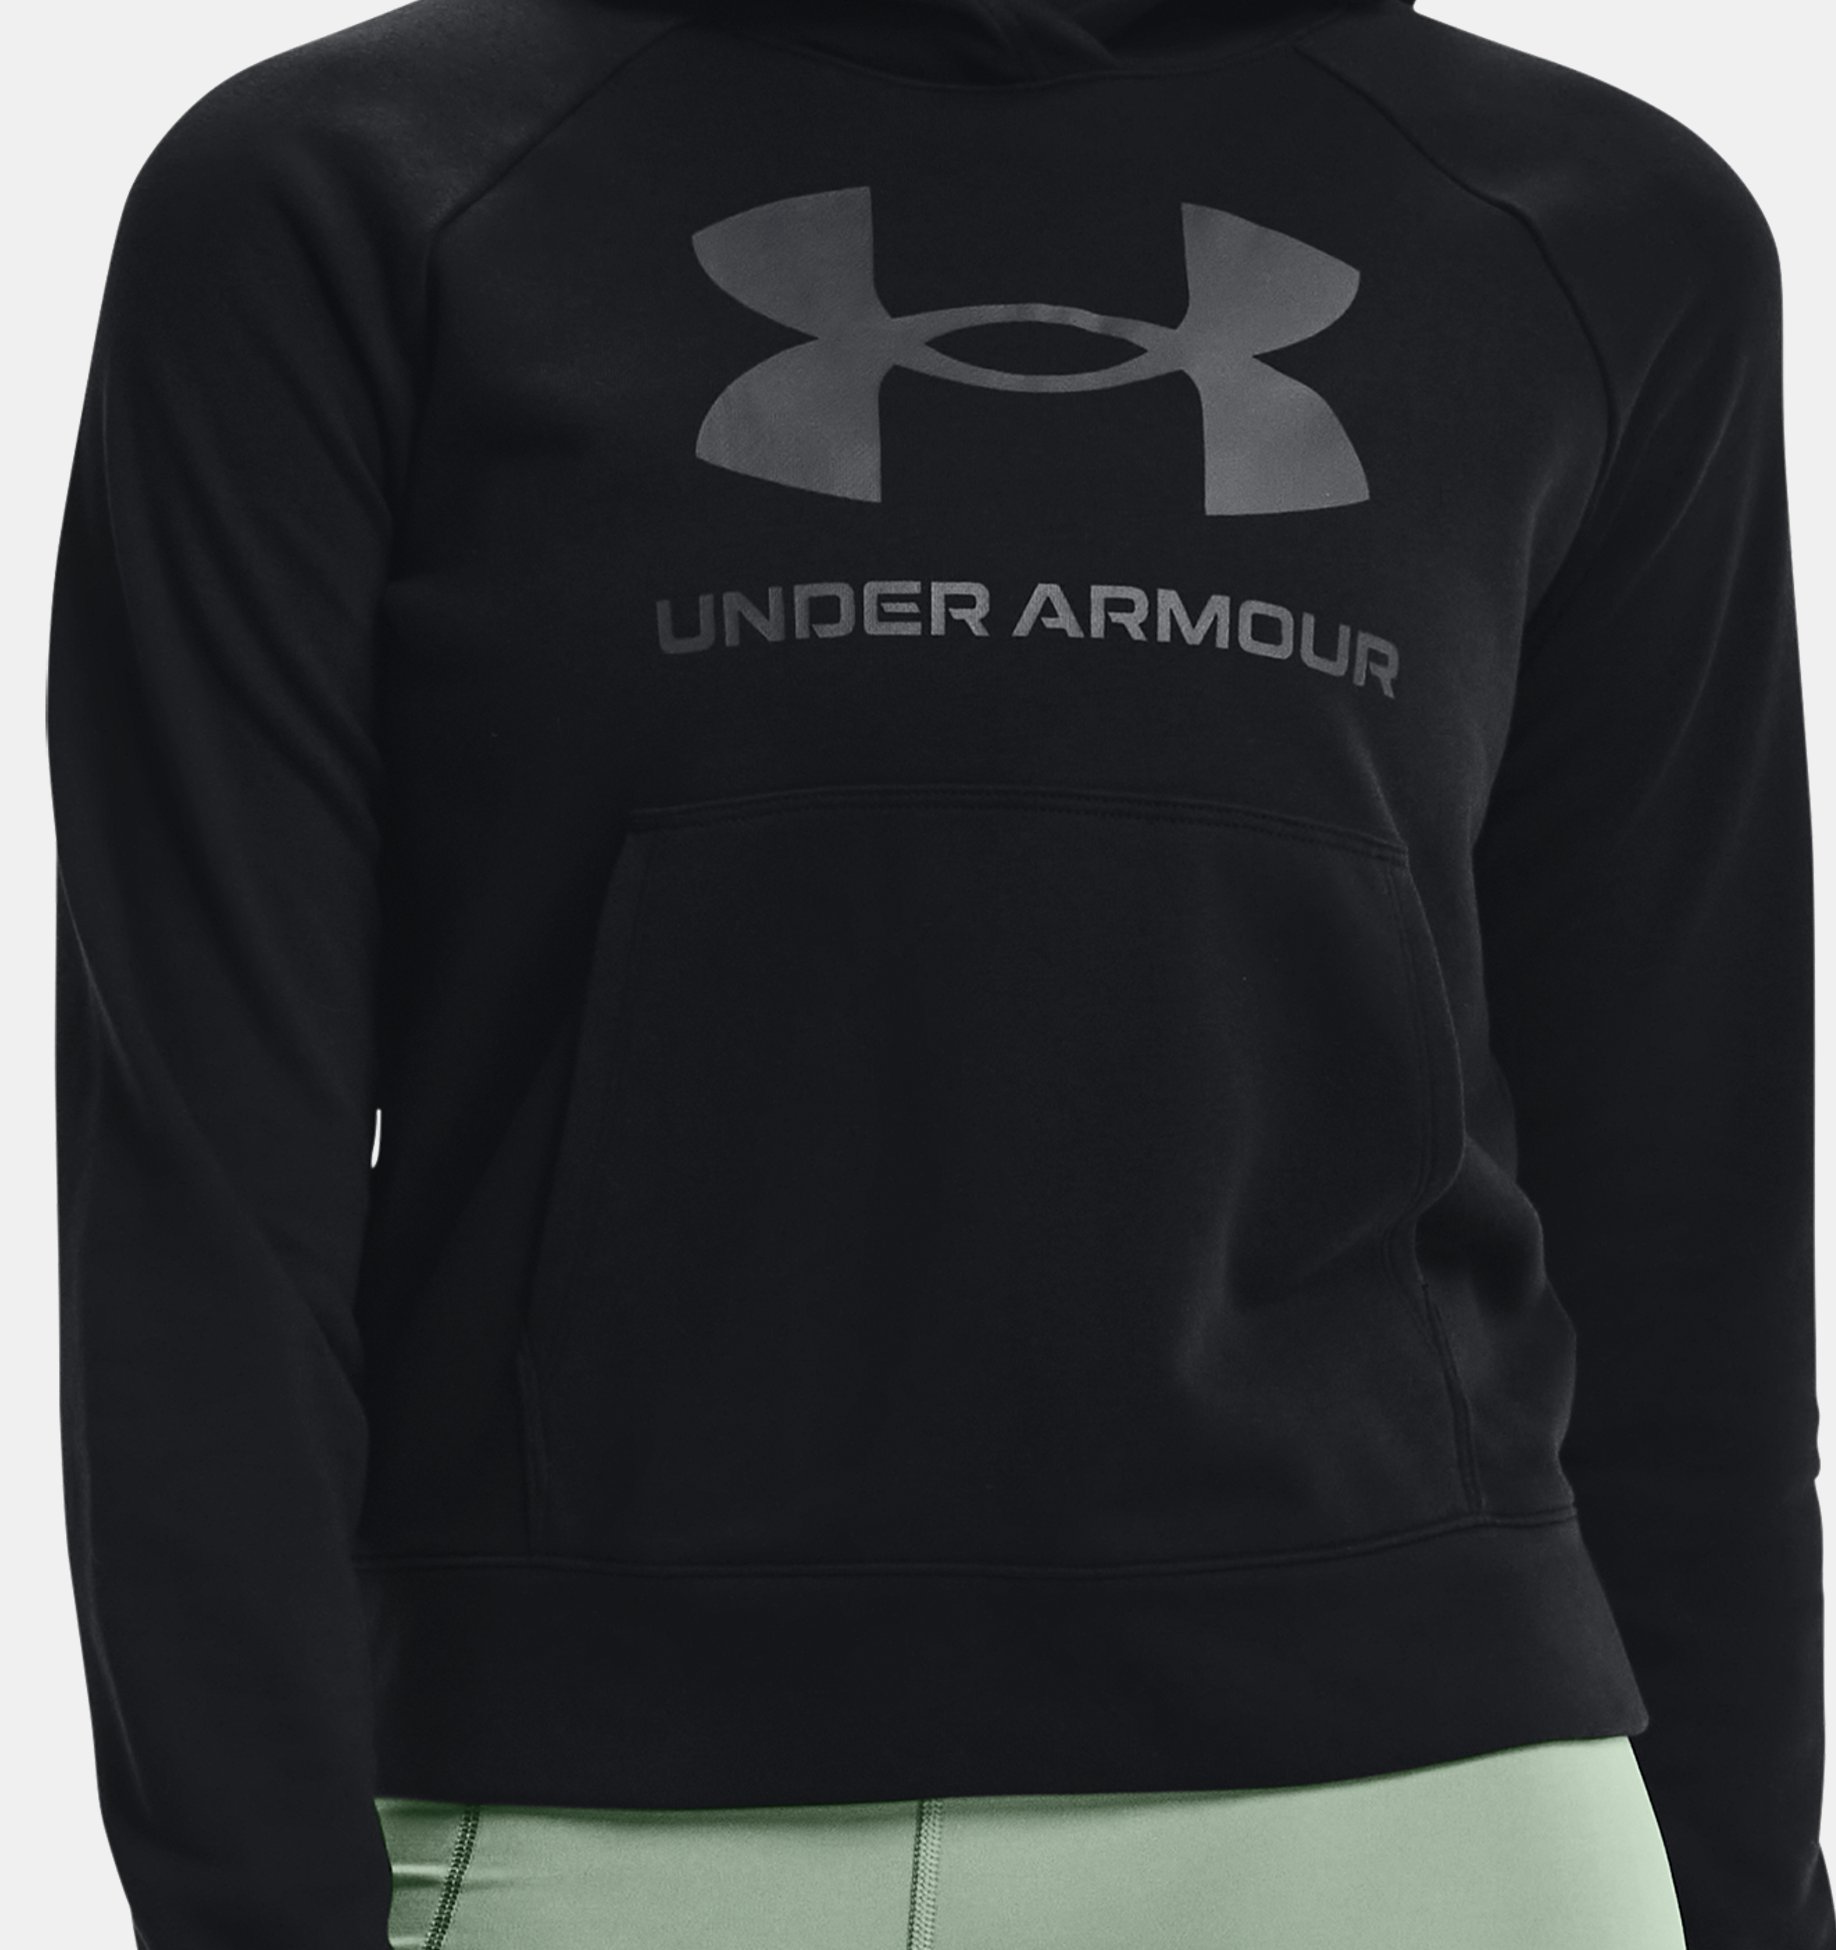 Under Armour Hoodies for as low as $14.98